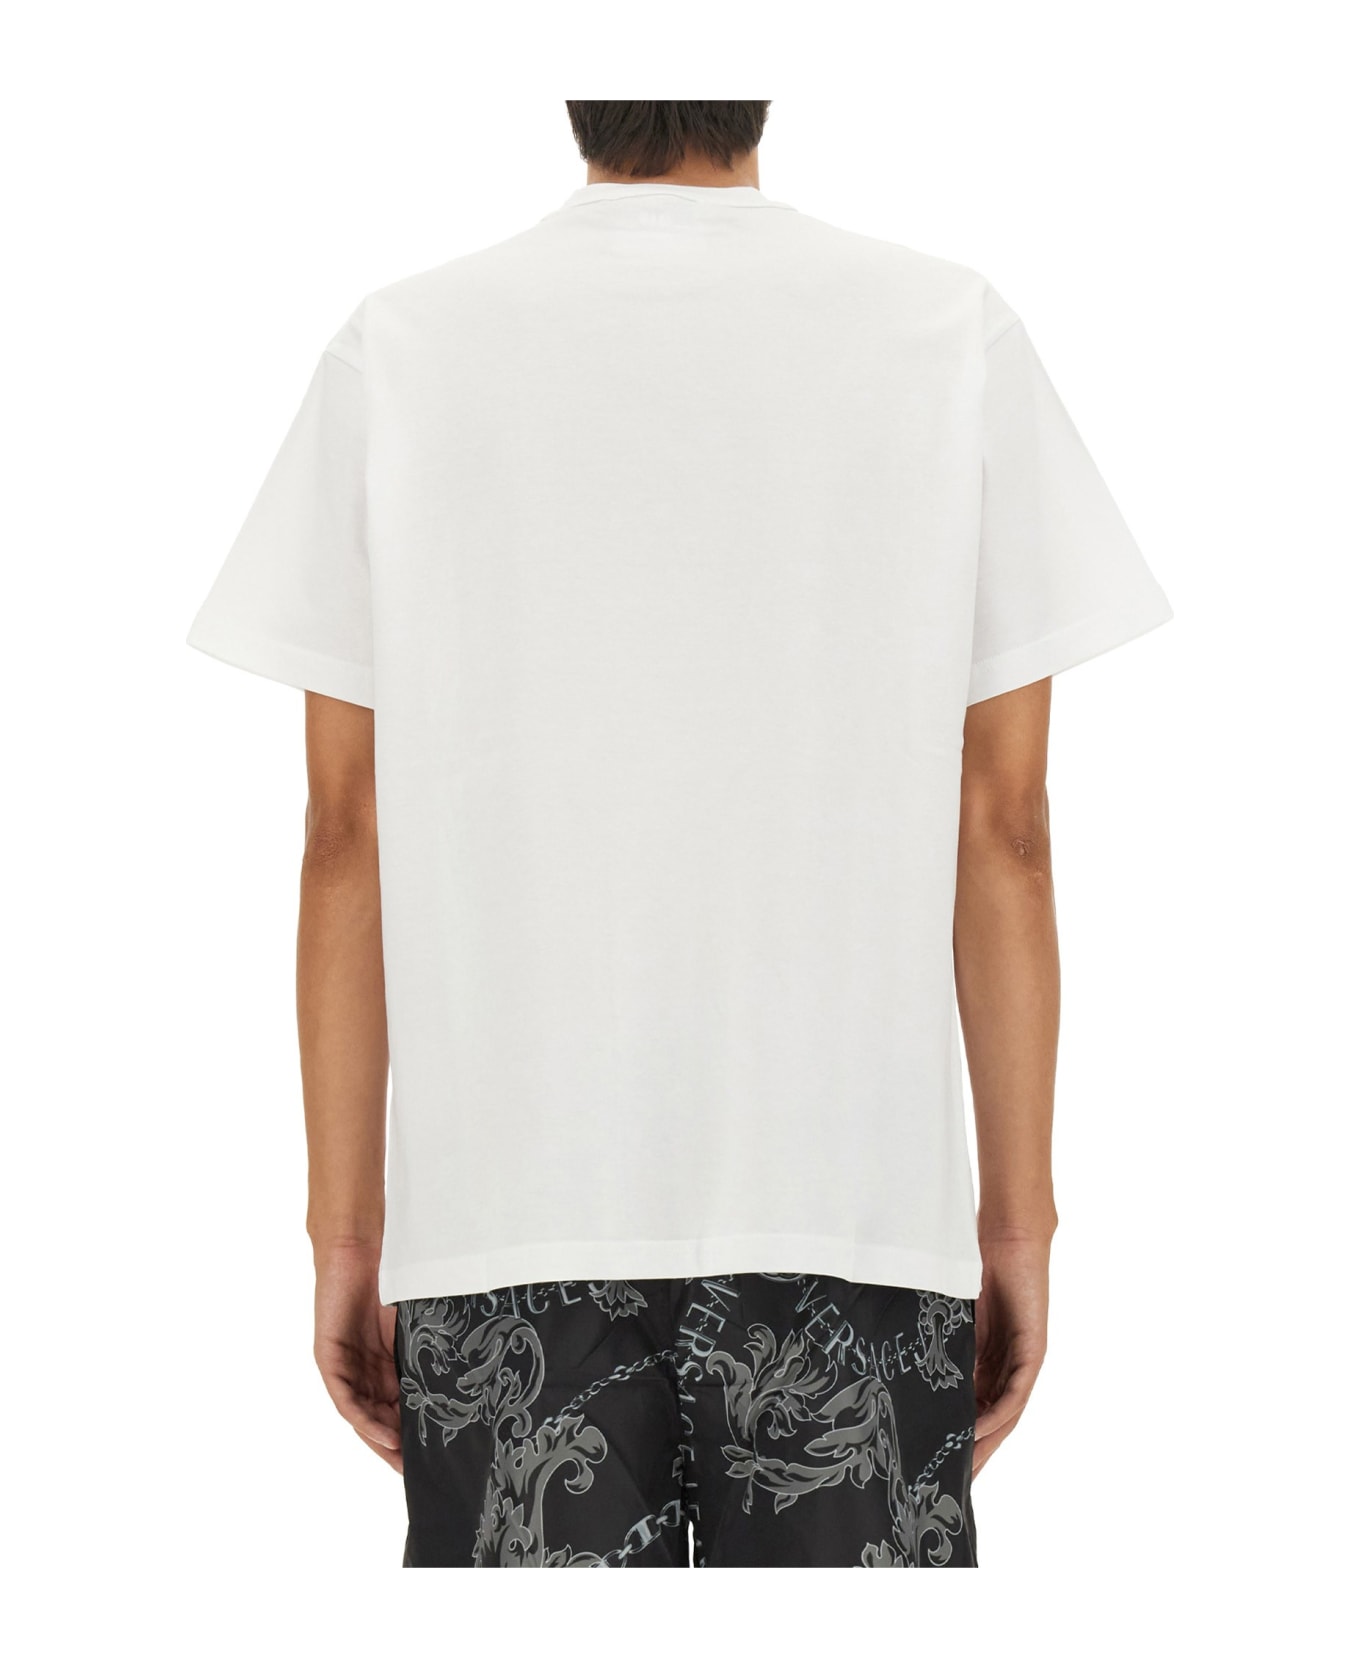 Versace Jeans Couture T-shirt With Logo - White シャツ